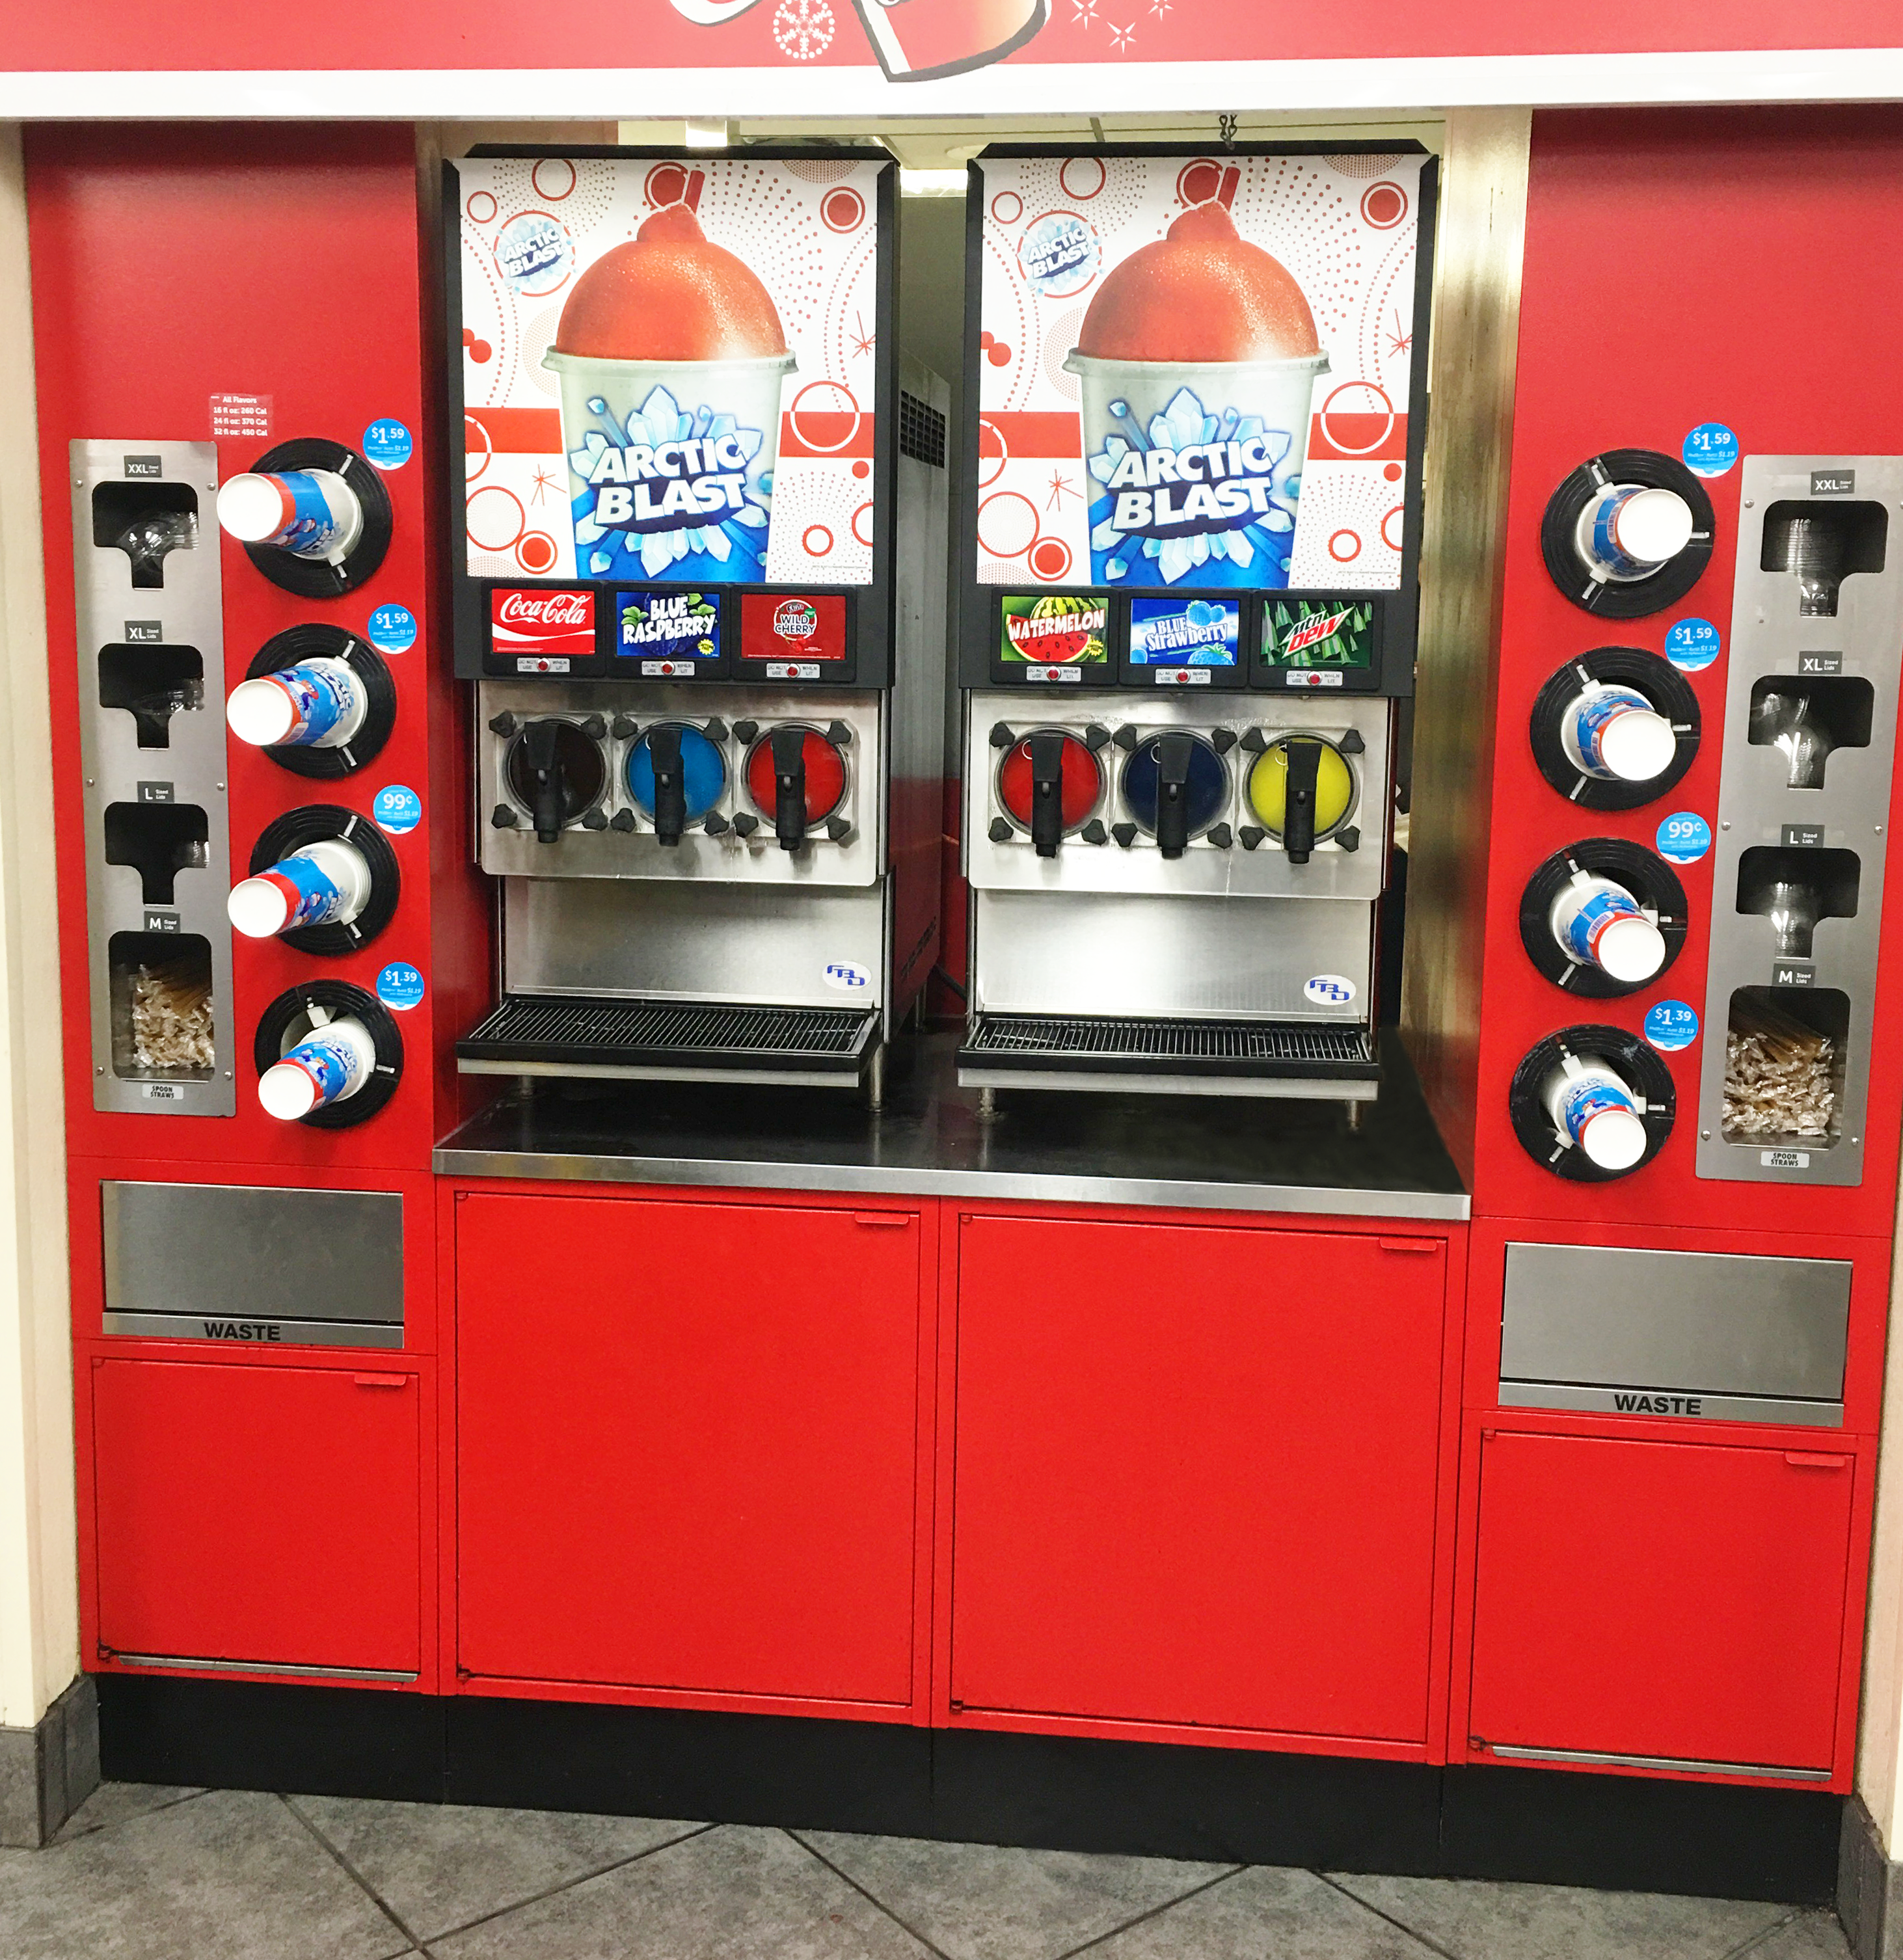 C-Stores are Ramping Up with Frozen Beverages - featured image